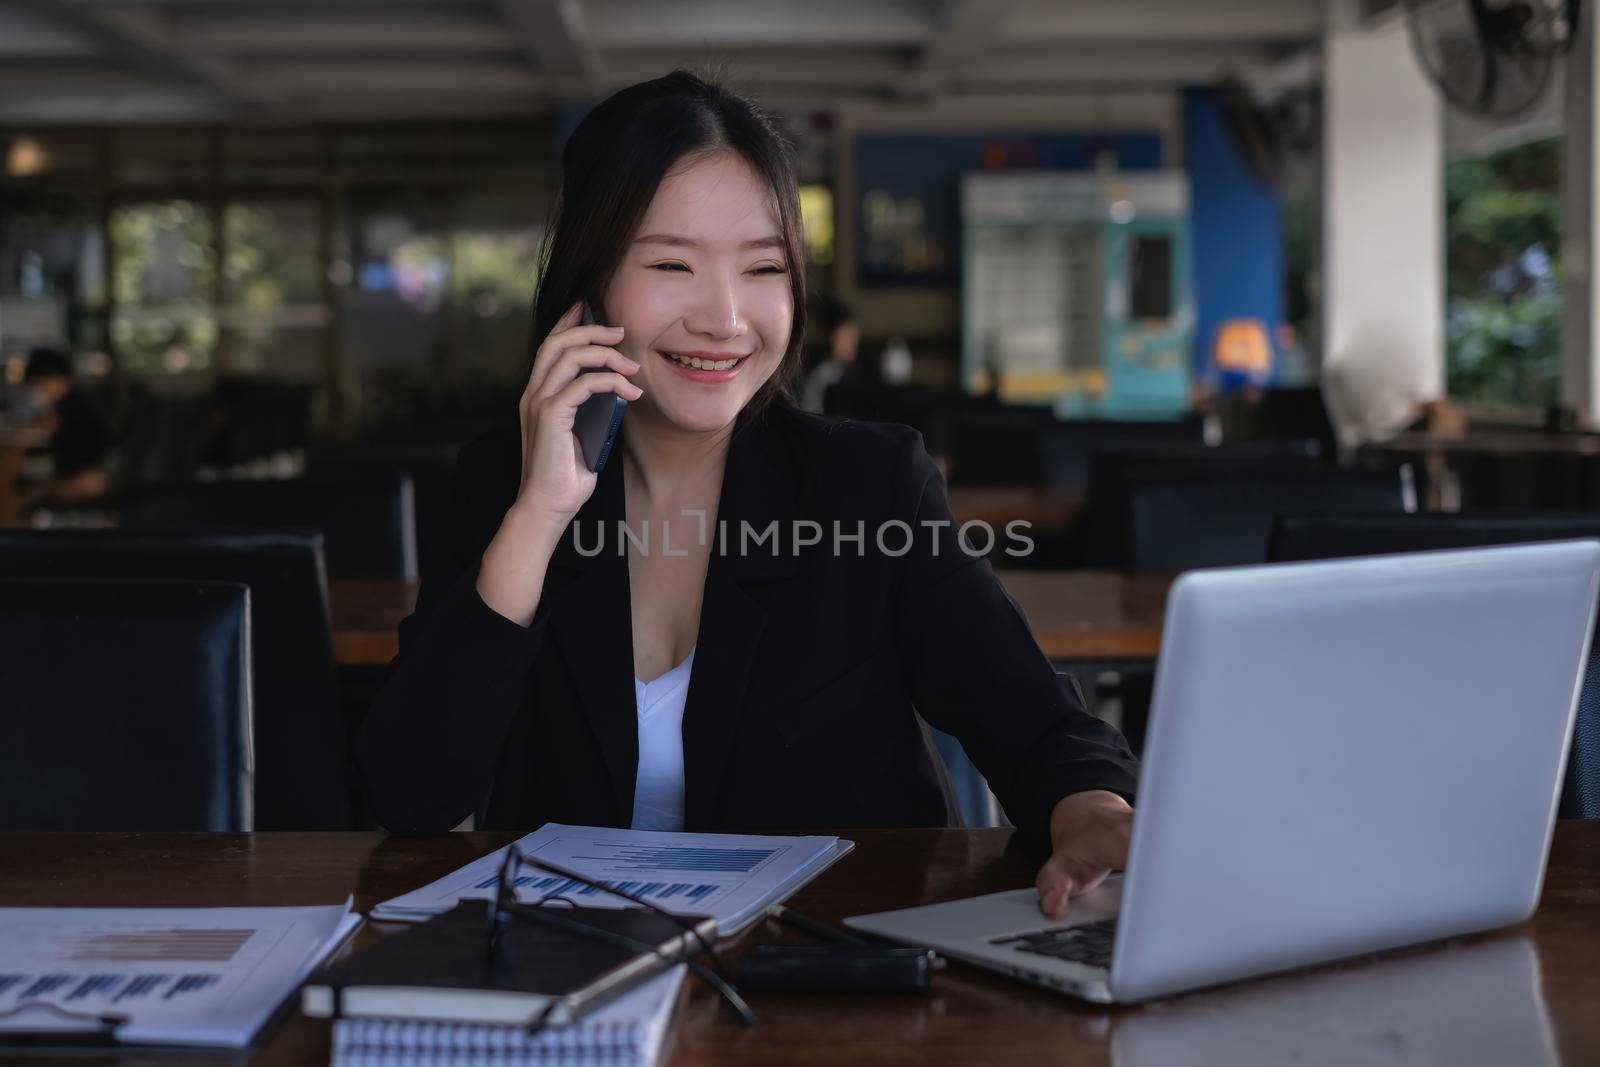 When she receives positive news from a customer, the happy businesswoman converses with her partners by cell phone. by itchaznong